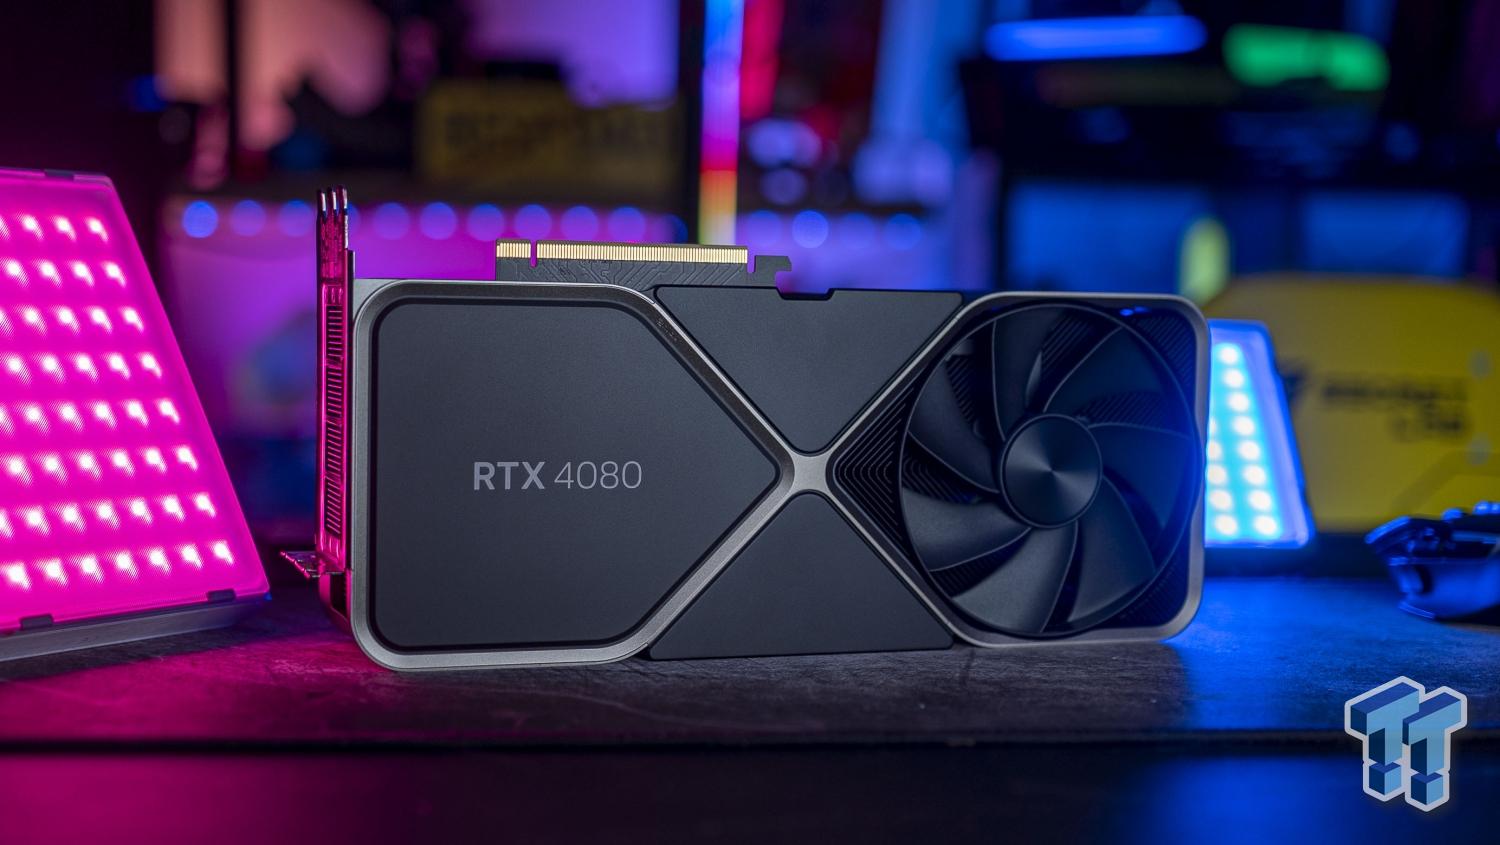 Nvidia GeForce RTX 4080 16 GB gaming and synthetic benchmarks leak